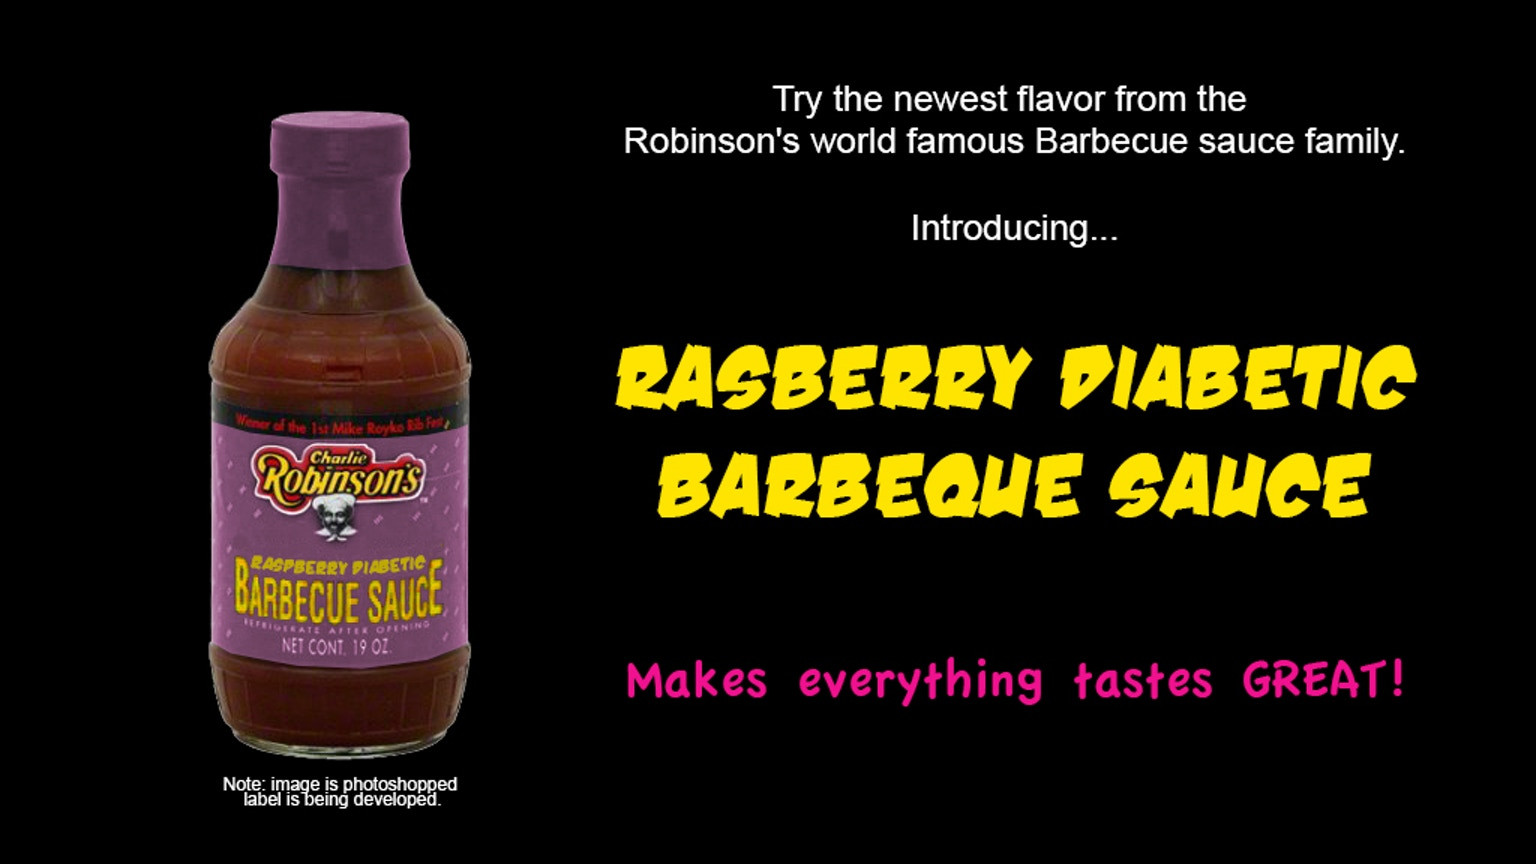 Diabetic Bbq Sauce Recipe
 Rasberry Diabetic Barbecue Sauce by Charlie Robinson